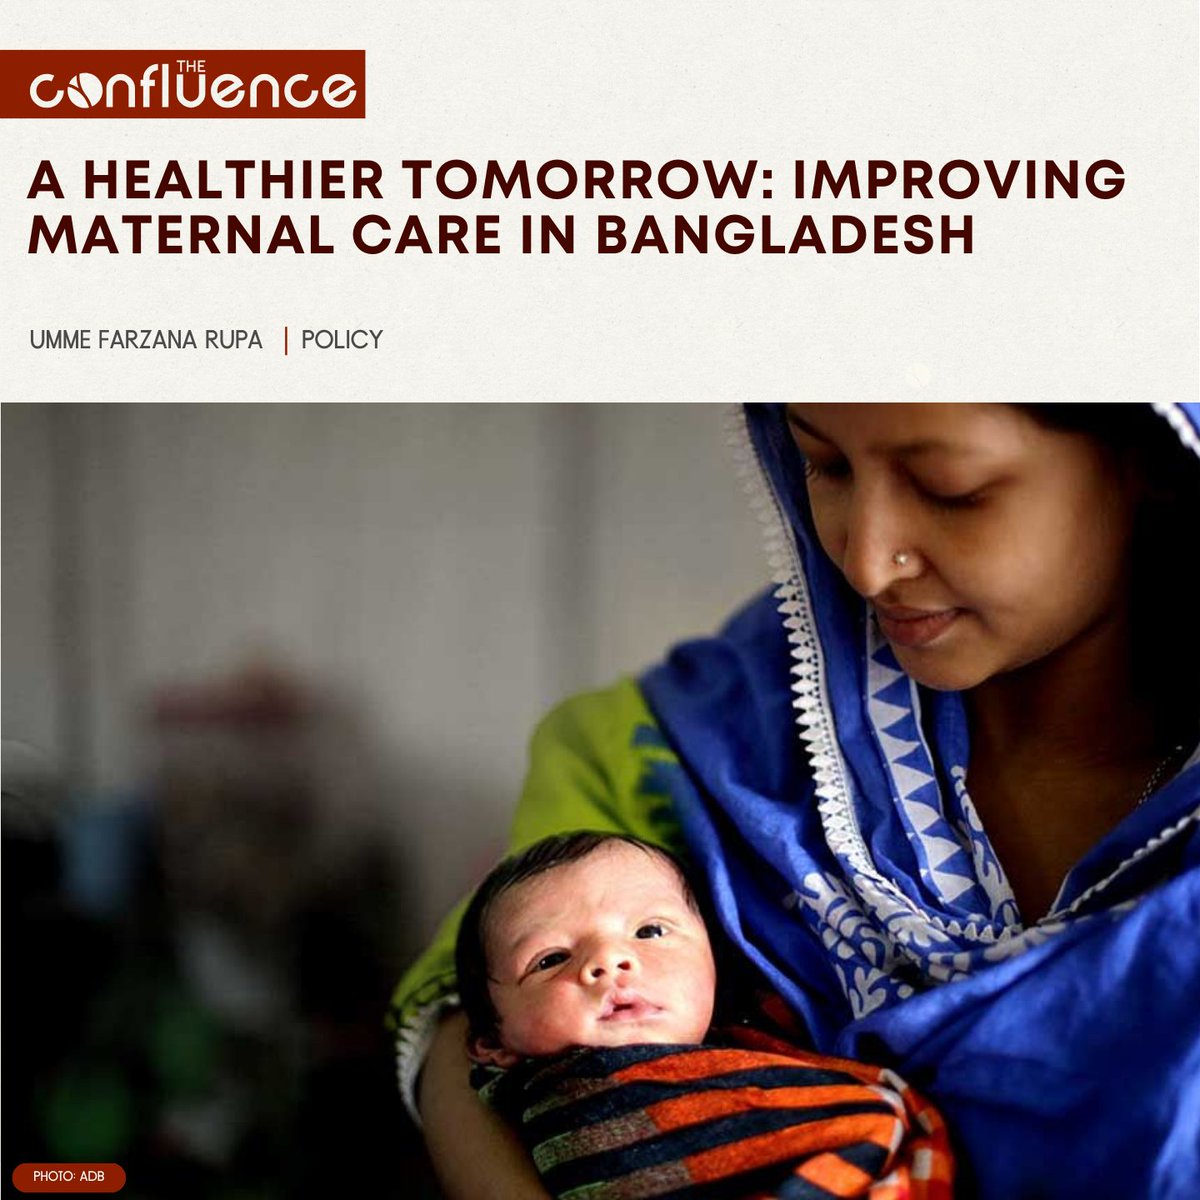 #Bangladesh is one of the developing world's success stories in improving #MaternalHealth. However, there is still some distance to cover. Read Umme Farzana Rupa's take on the country's progress, and remaning challenges, in this regard here 👇
theconfluence.blog/a-healthier-to…